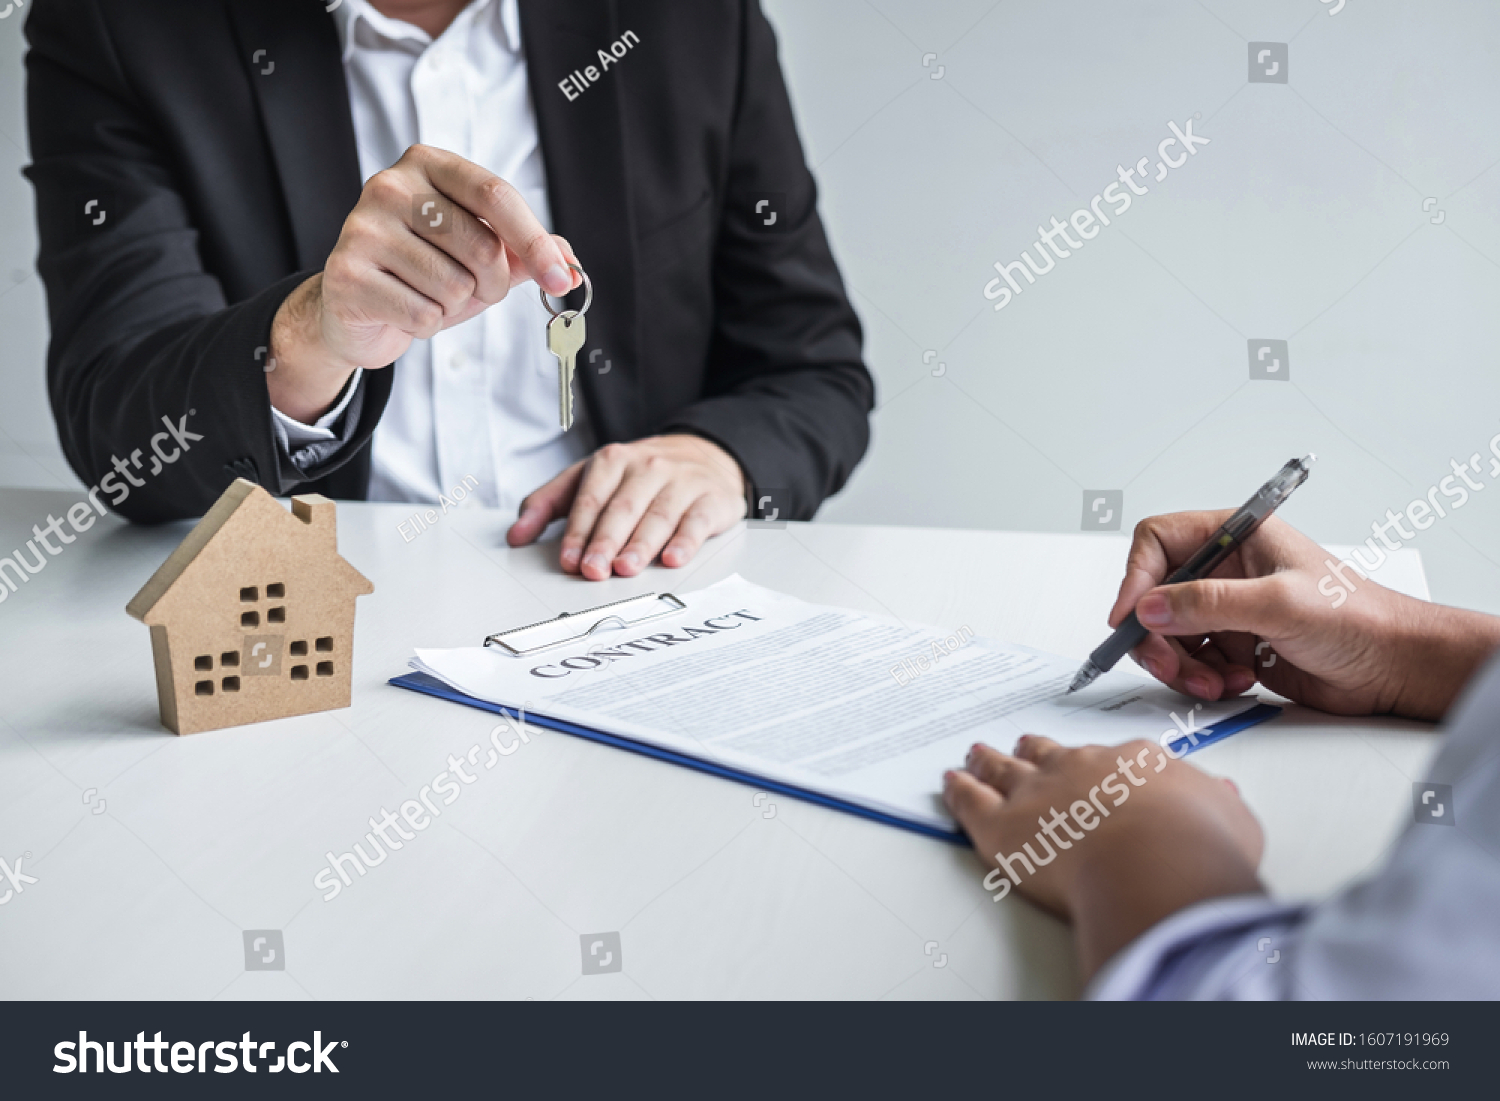 Estate agent giving house keys to client after signing agreement contract real estate with approved mortgage application form, concerning mortgage loan offer for and house insurance. #1607191969